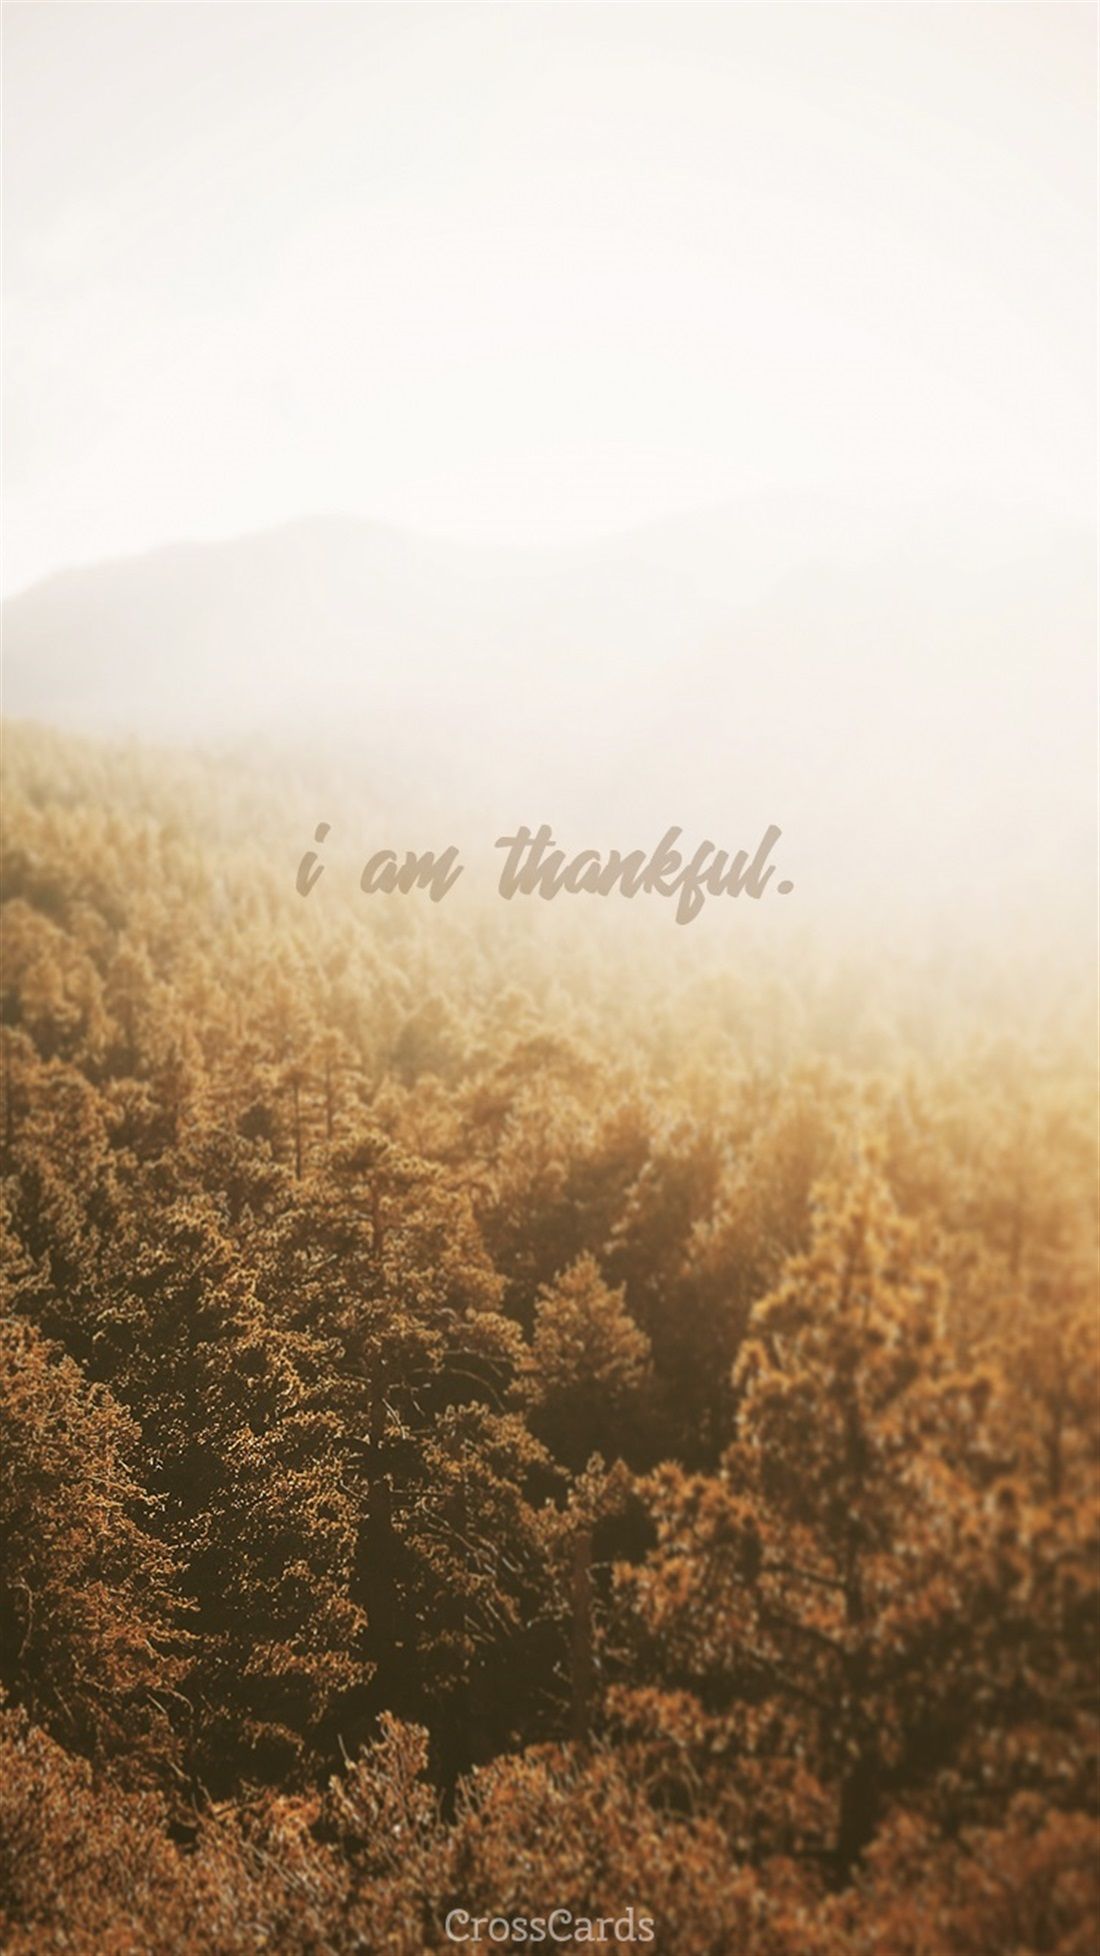 Thankful Wallpapers   Top Free Thankful Backgrounds